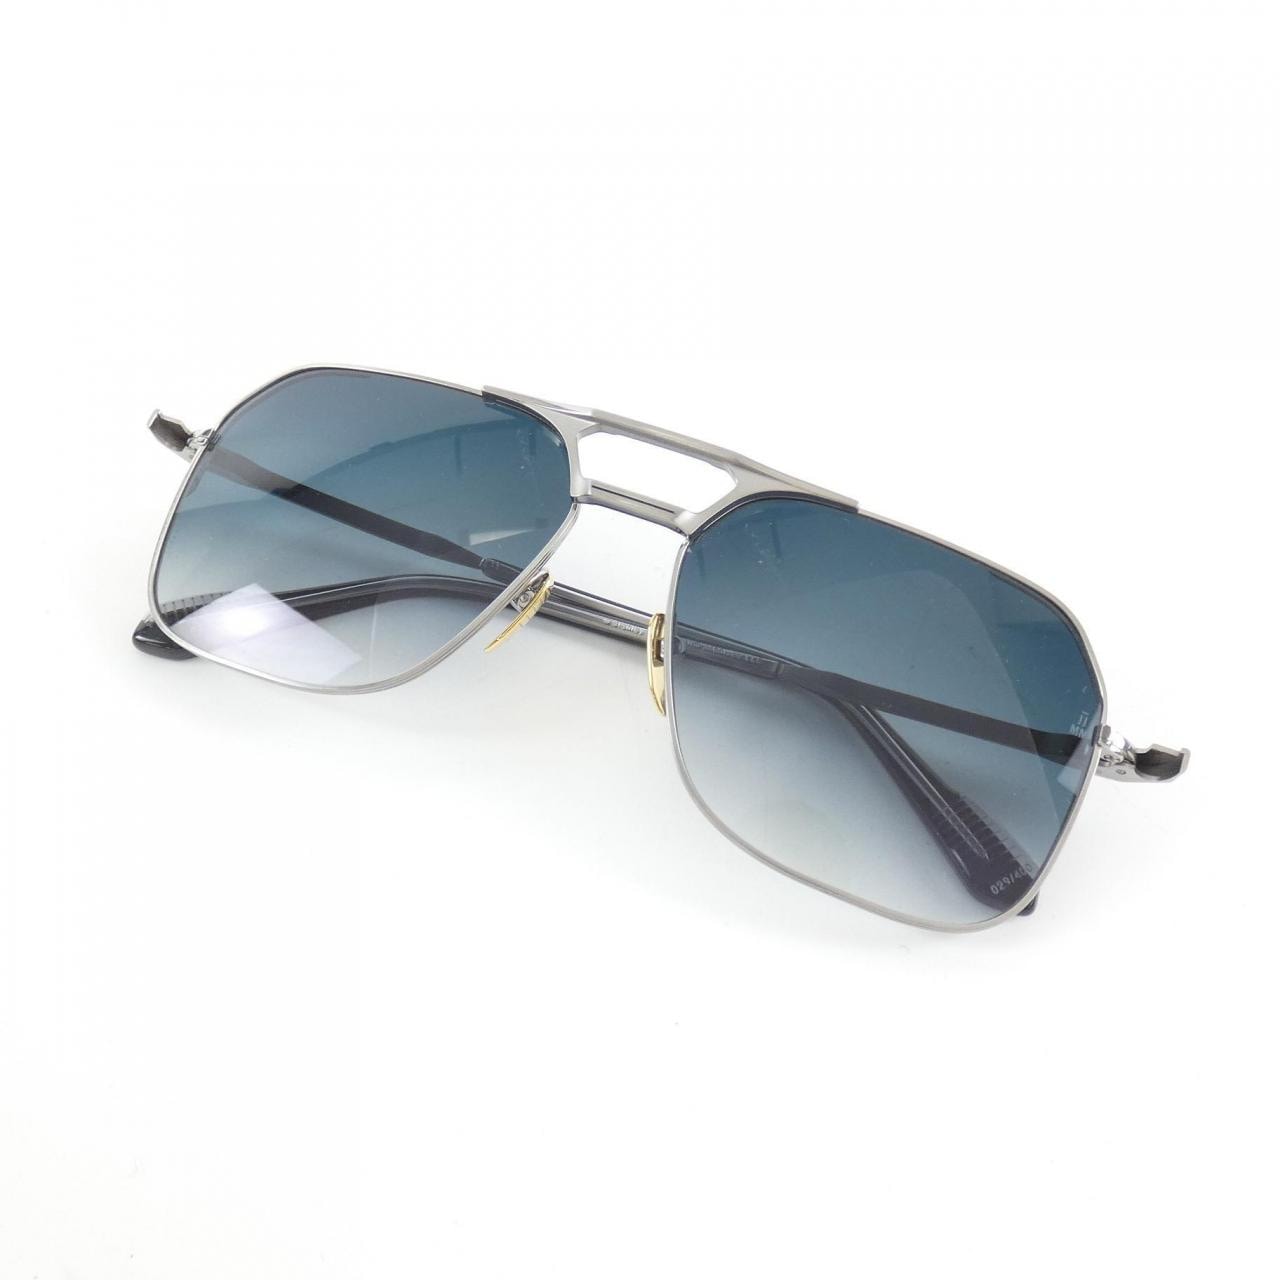 JACQUES MARIE MAGE SUNGLASSES